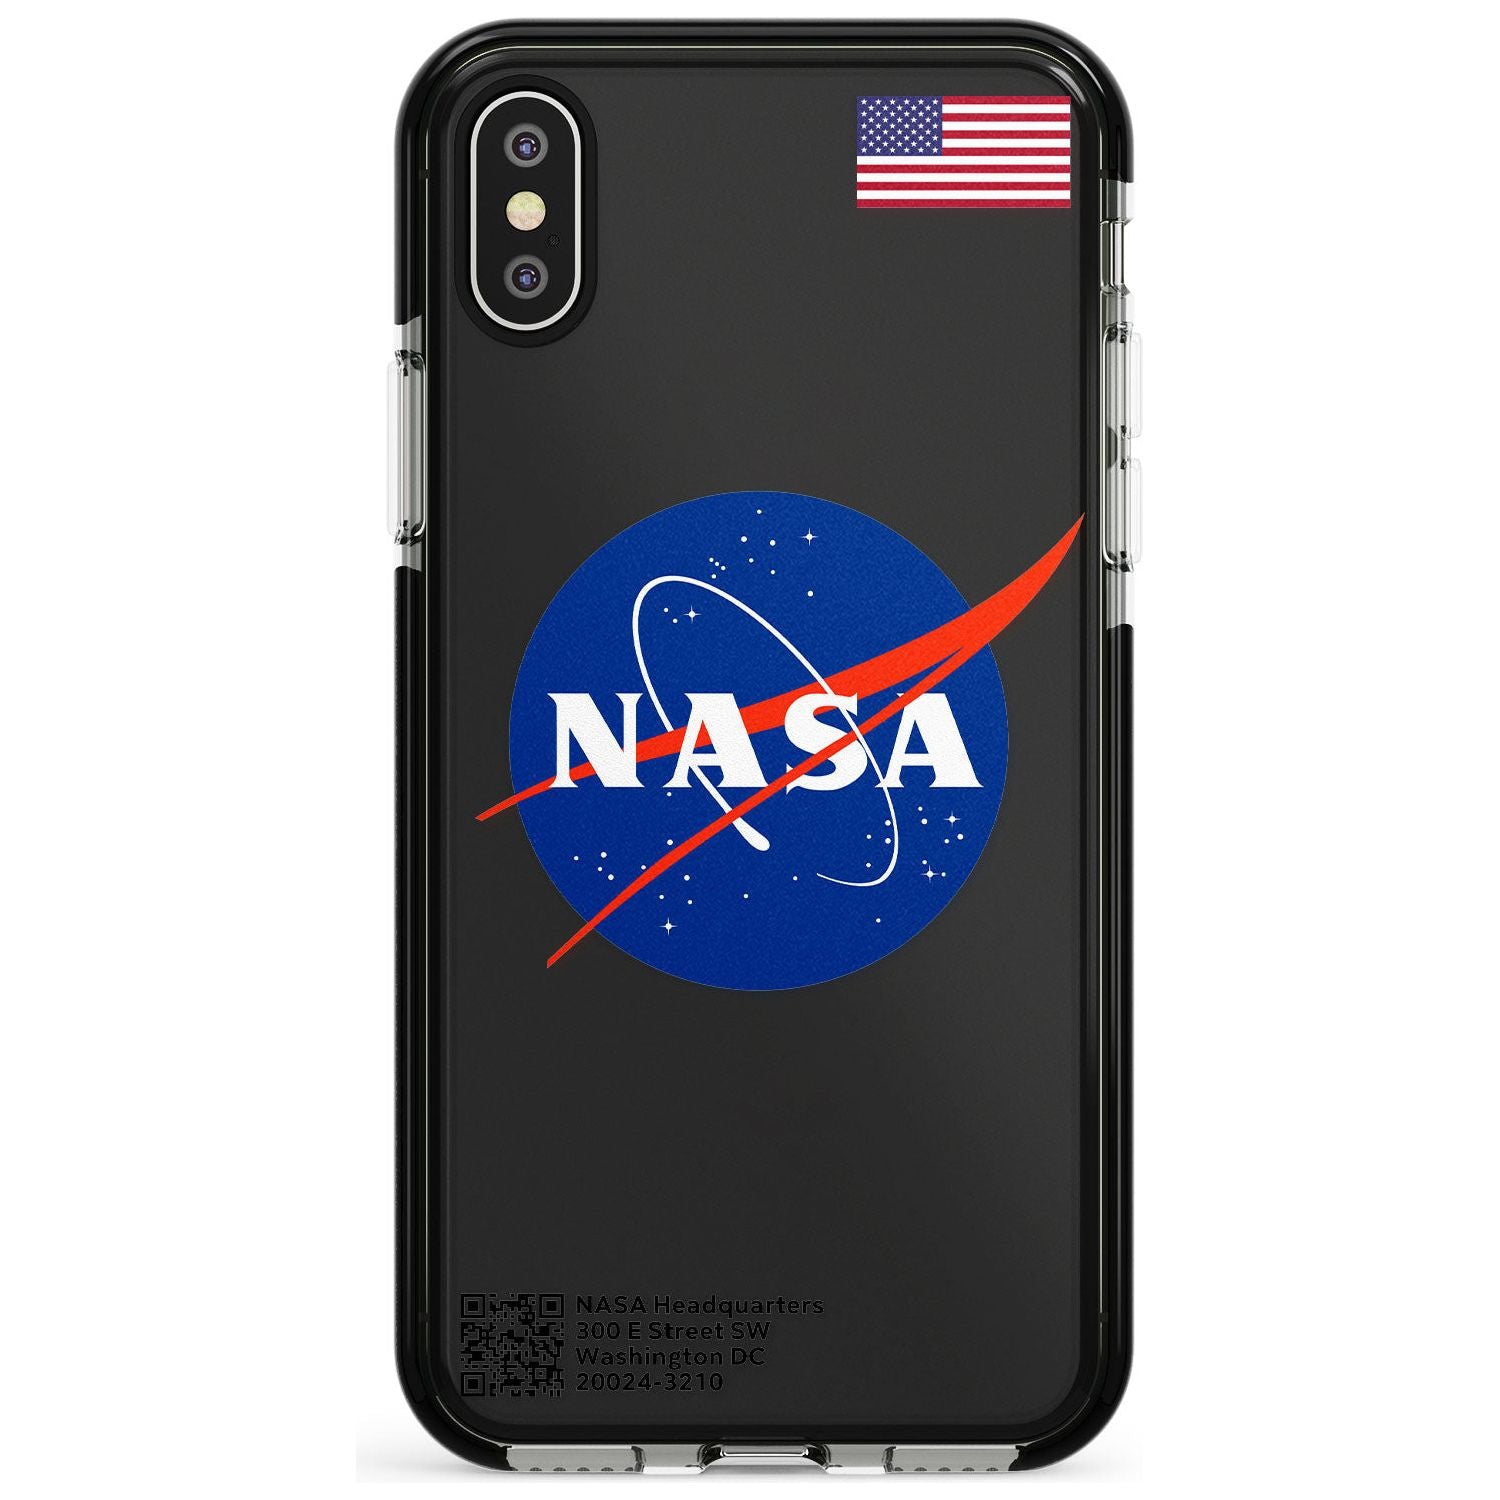 NASA Meatball Black Impact Phone Case for iPhone X XS Max XR